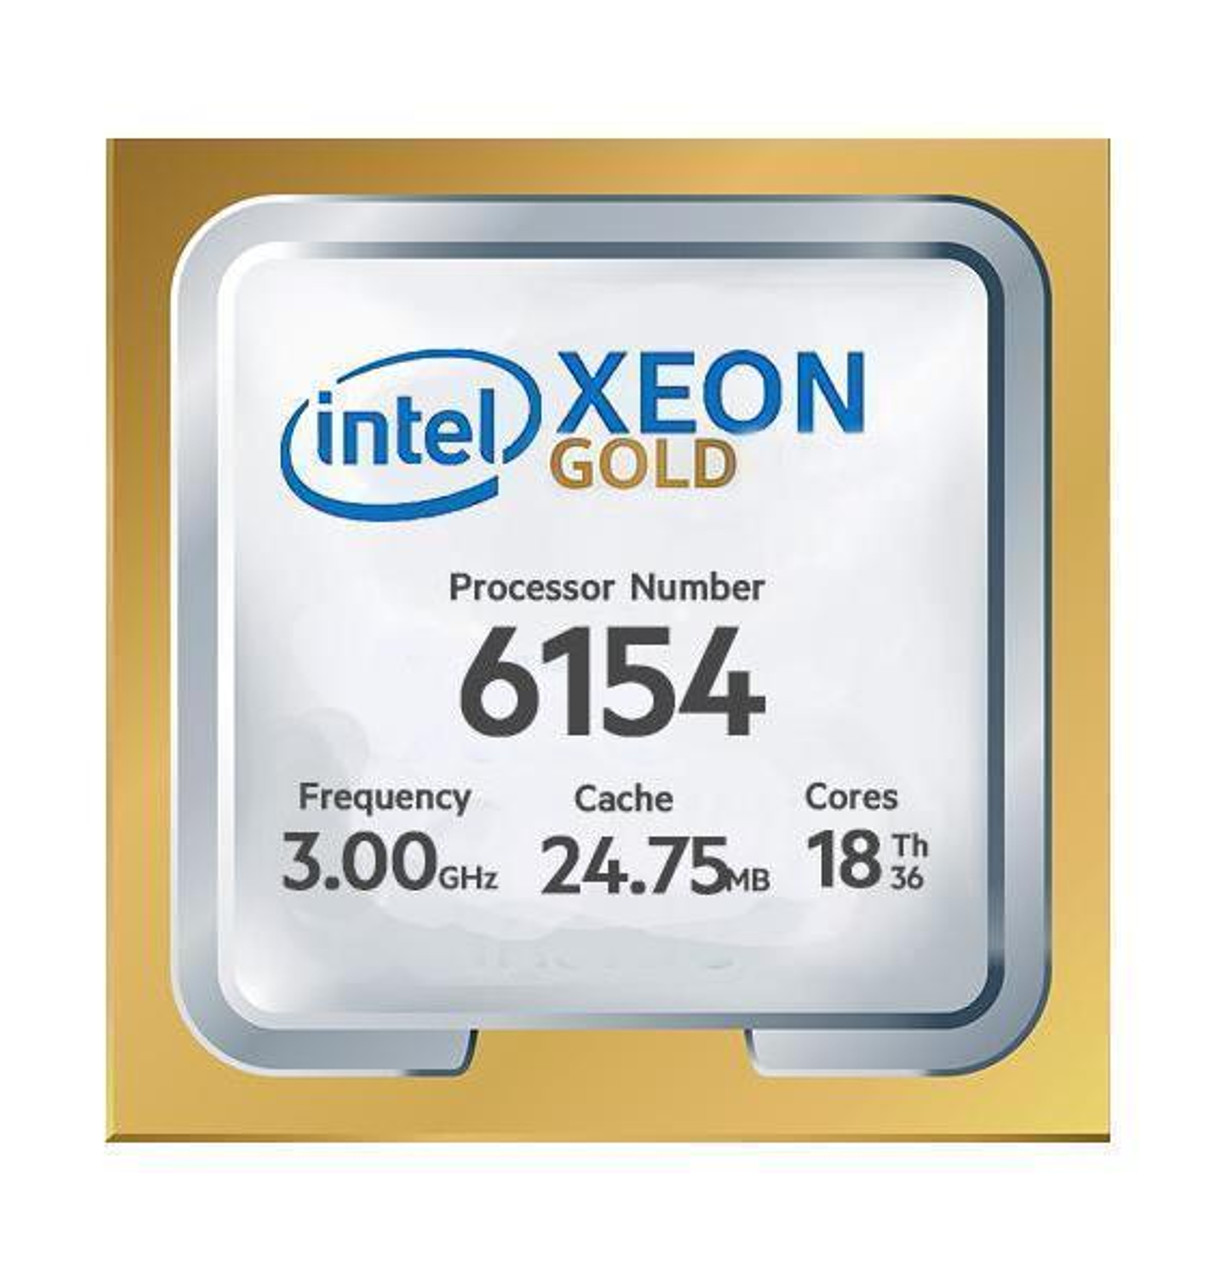 HP Intel Xeon Gold 6154 Octadeca-core 18-Core 3GHz Processor Upgrade 24.75MB L3 Cache 18MB L2 Cache 64-bit Processing 3.70GHz Overclocking Speed 14